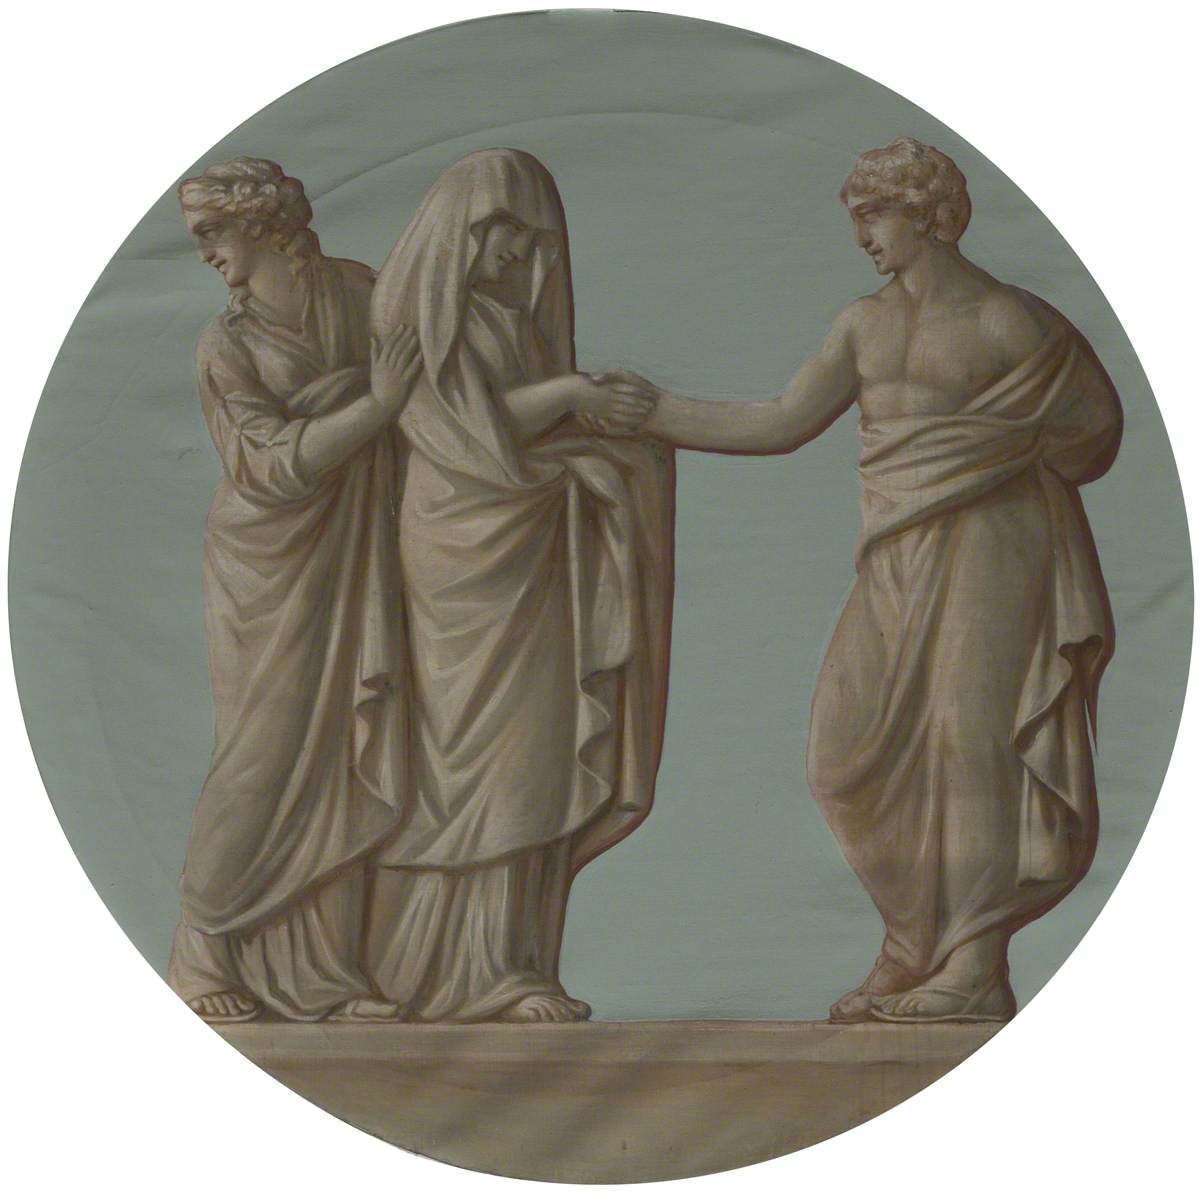 A (Grecian/Roman) Wedding: Introducing the Intended Bride (The Marriage of Peleus and Thetis)